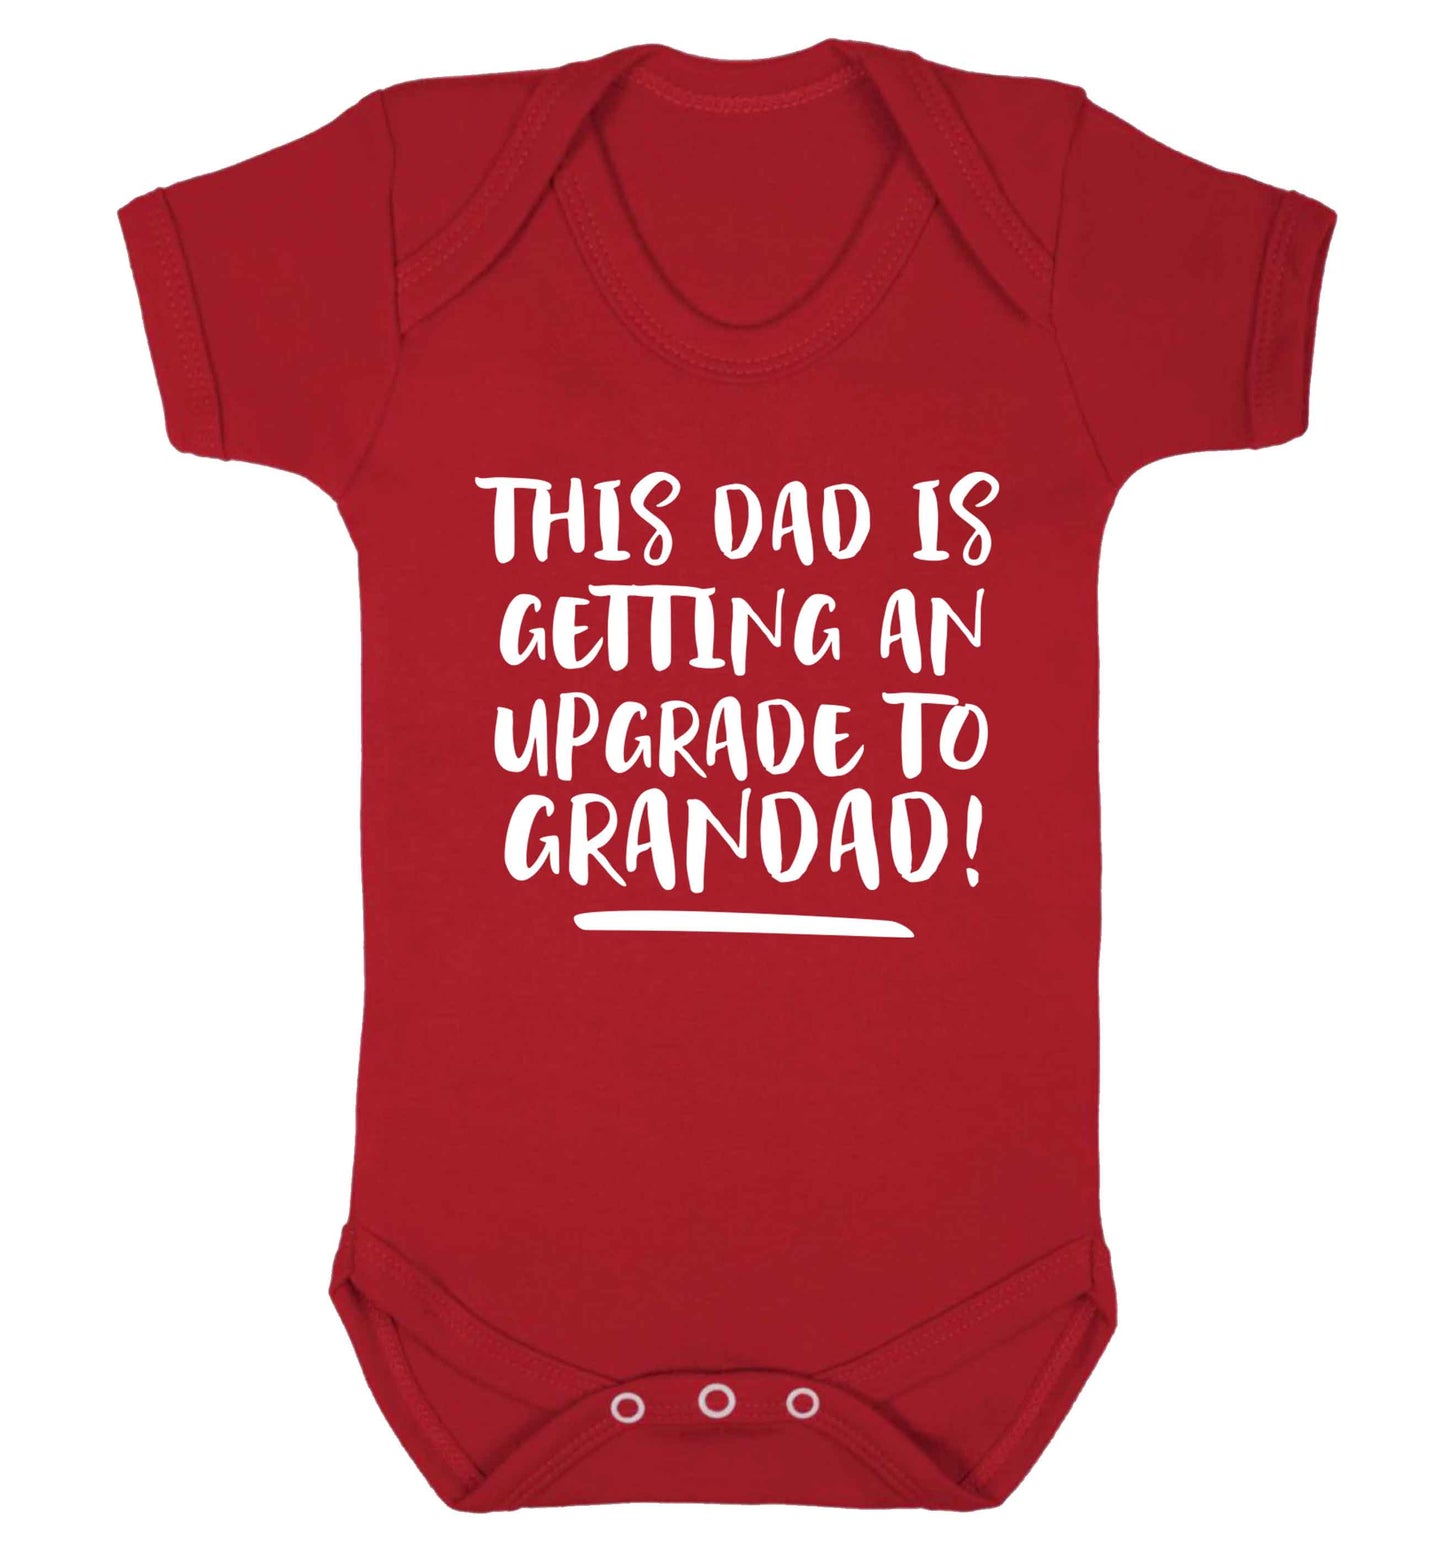 This dad is getting an upgrade to grandad! Baby Vest red 18-24 months